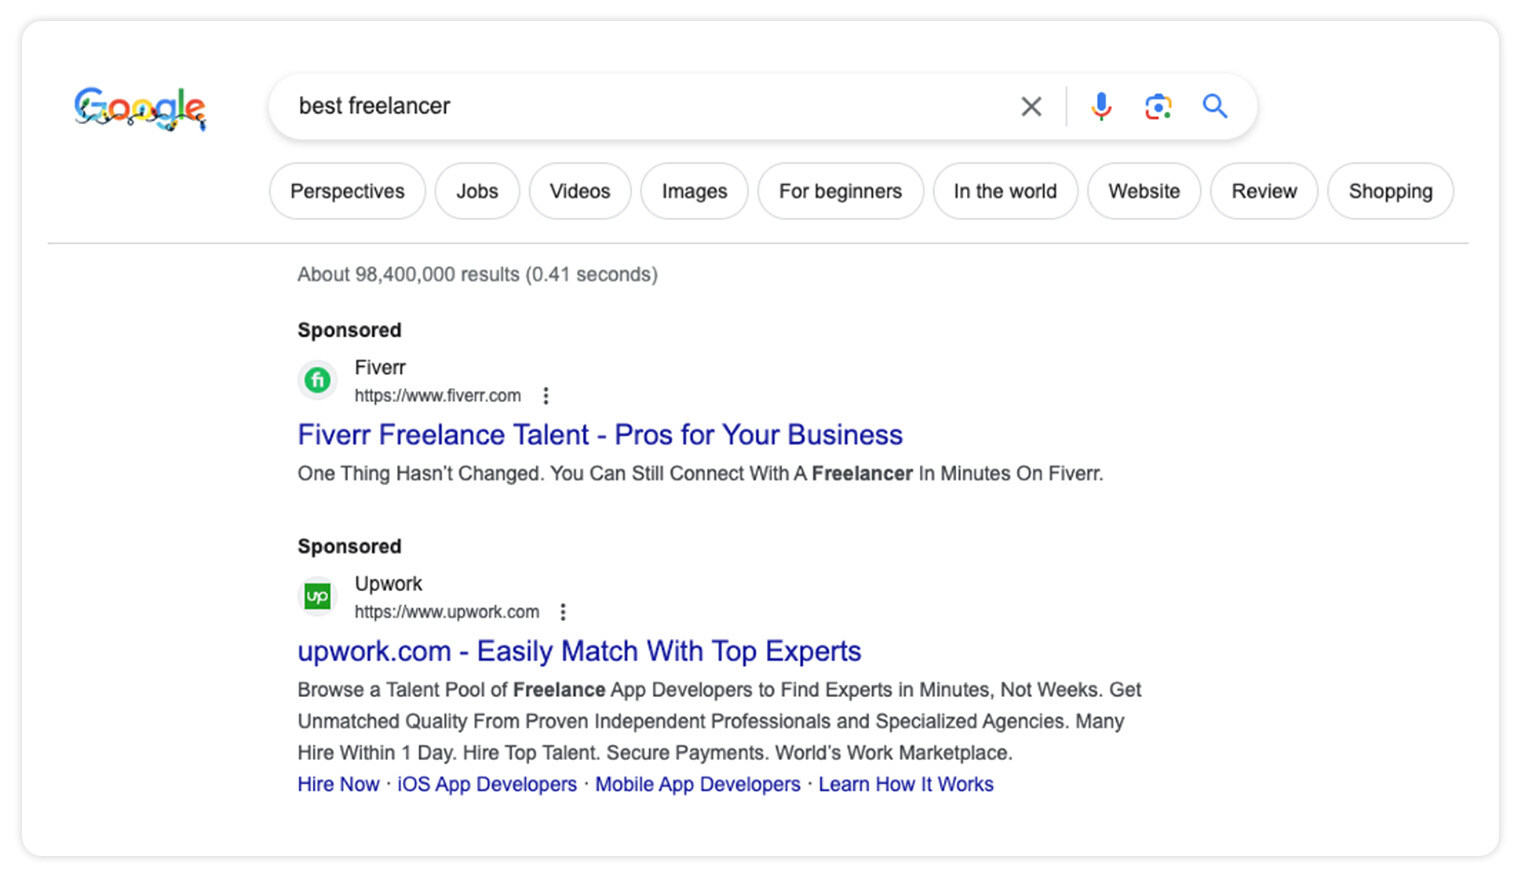 Google search results list for best freelancer phrase in a search bar written